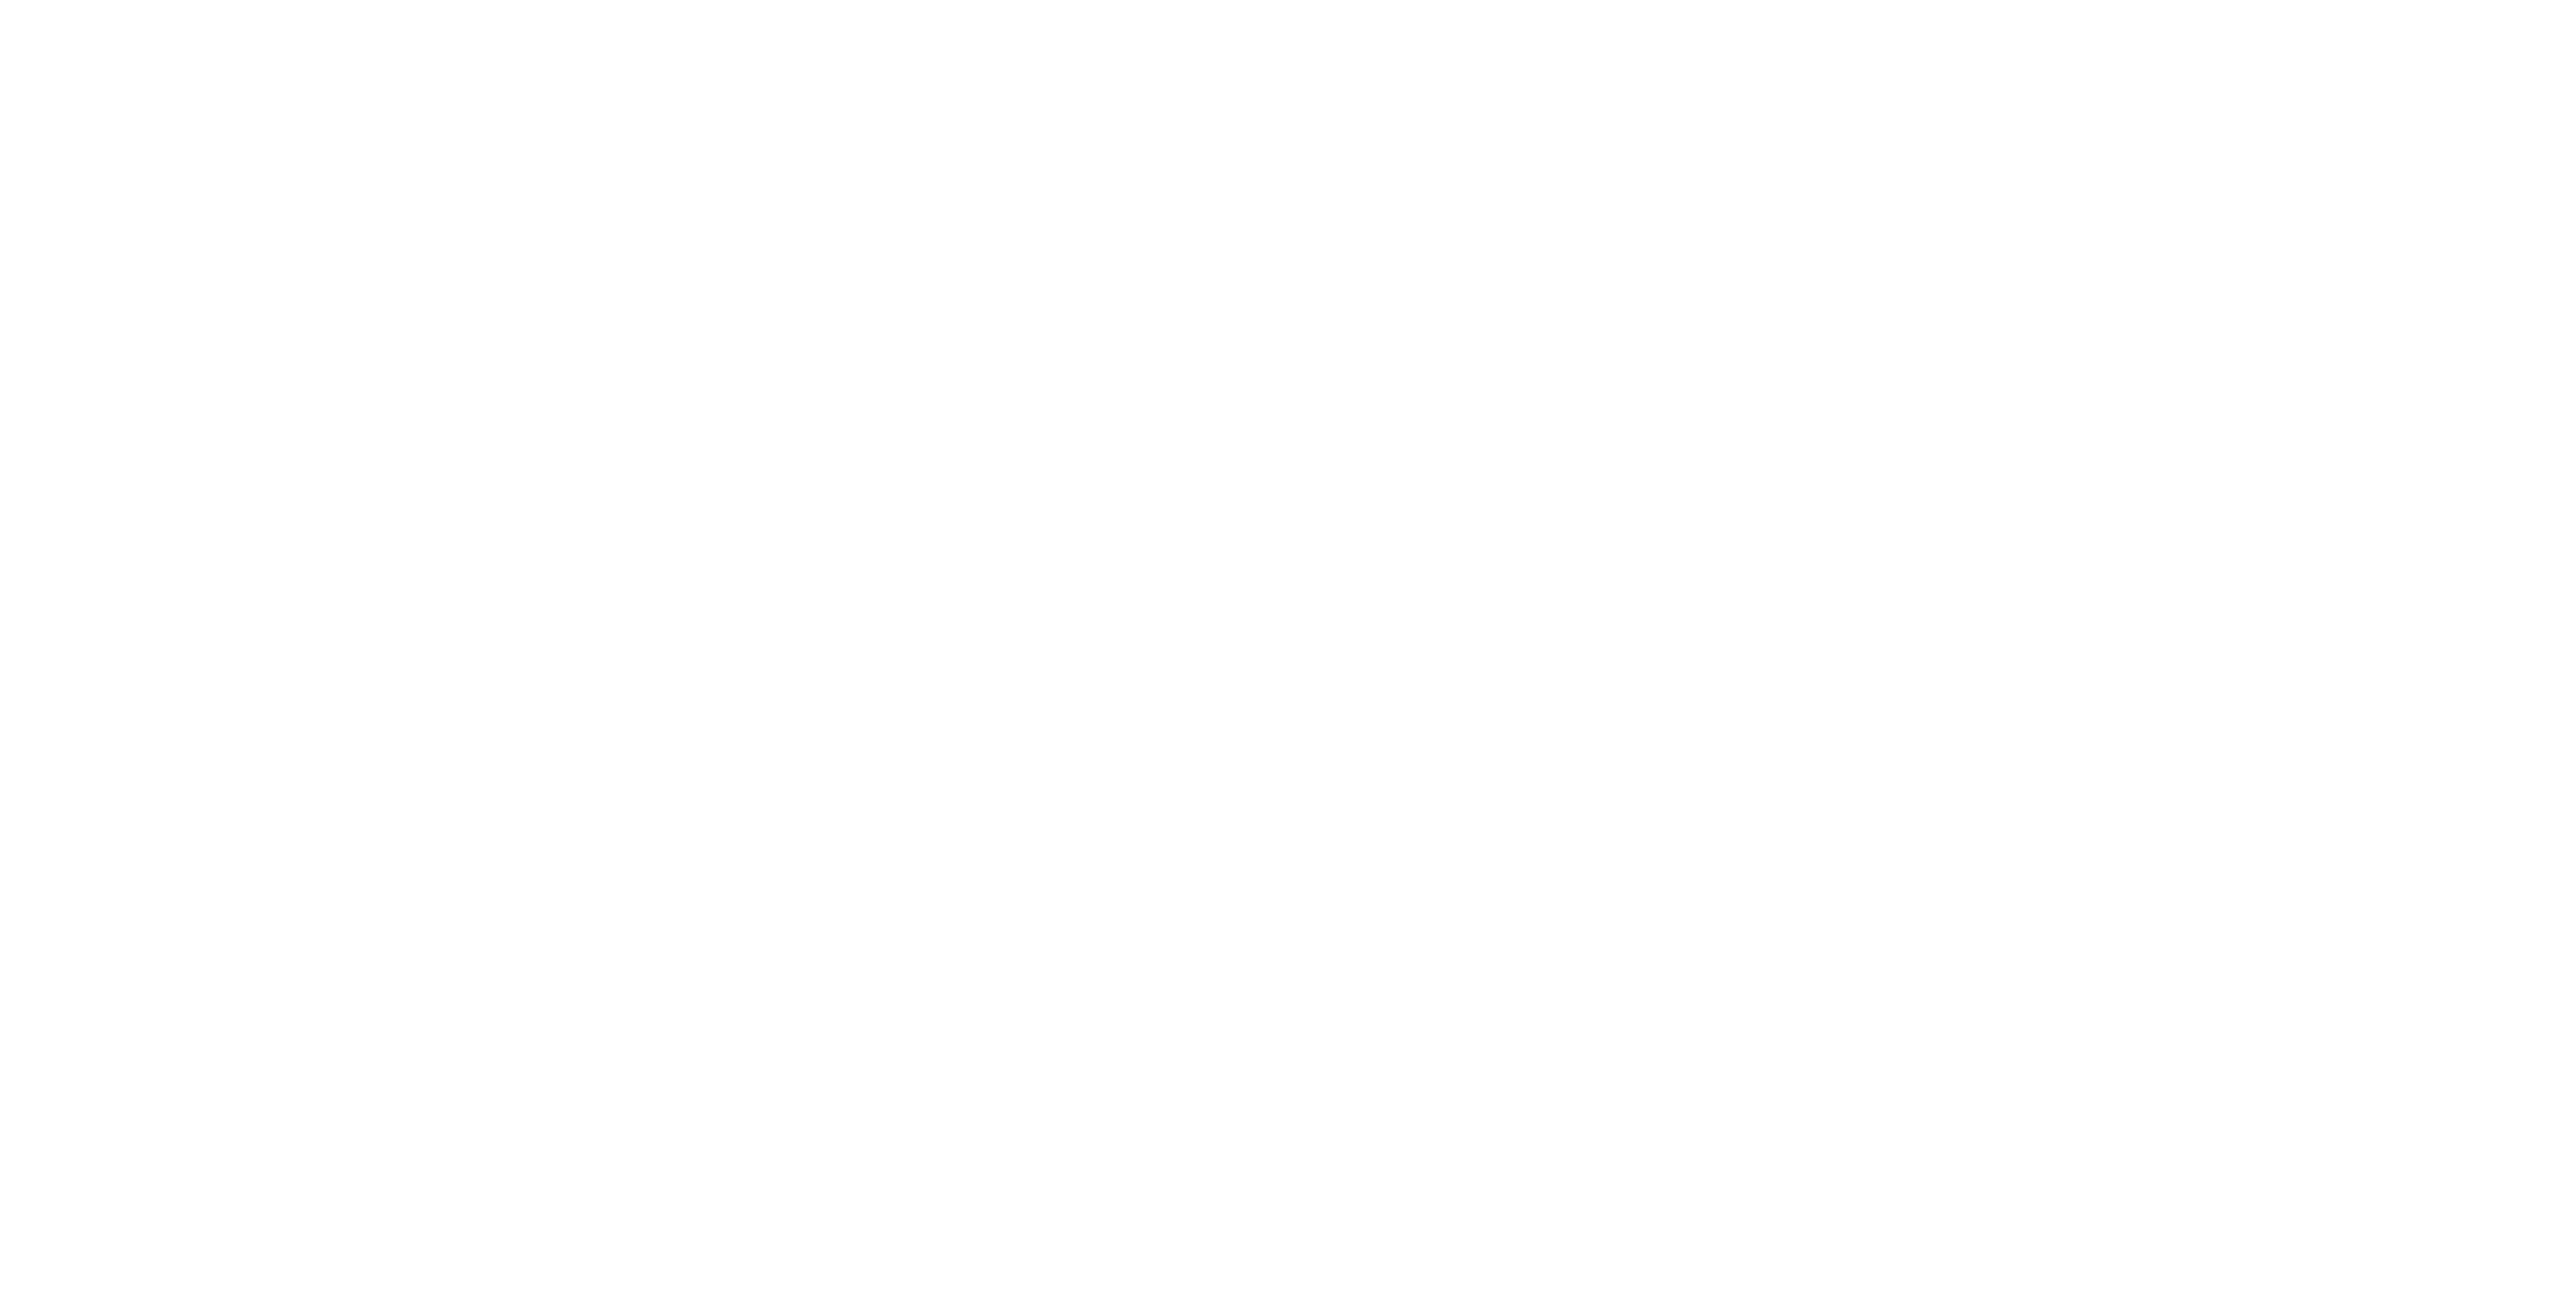 PRISMA is a New Zealand owned and operated company